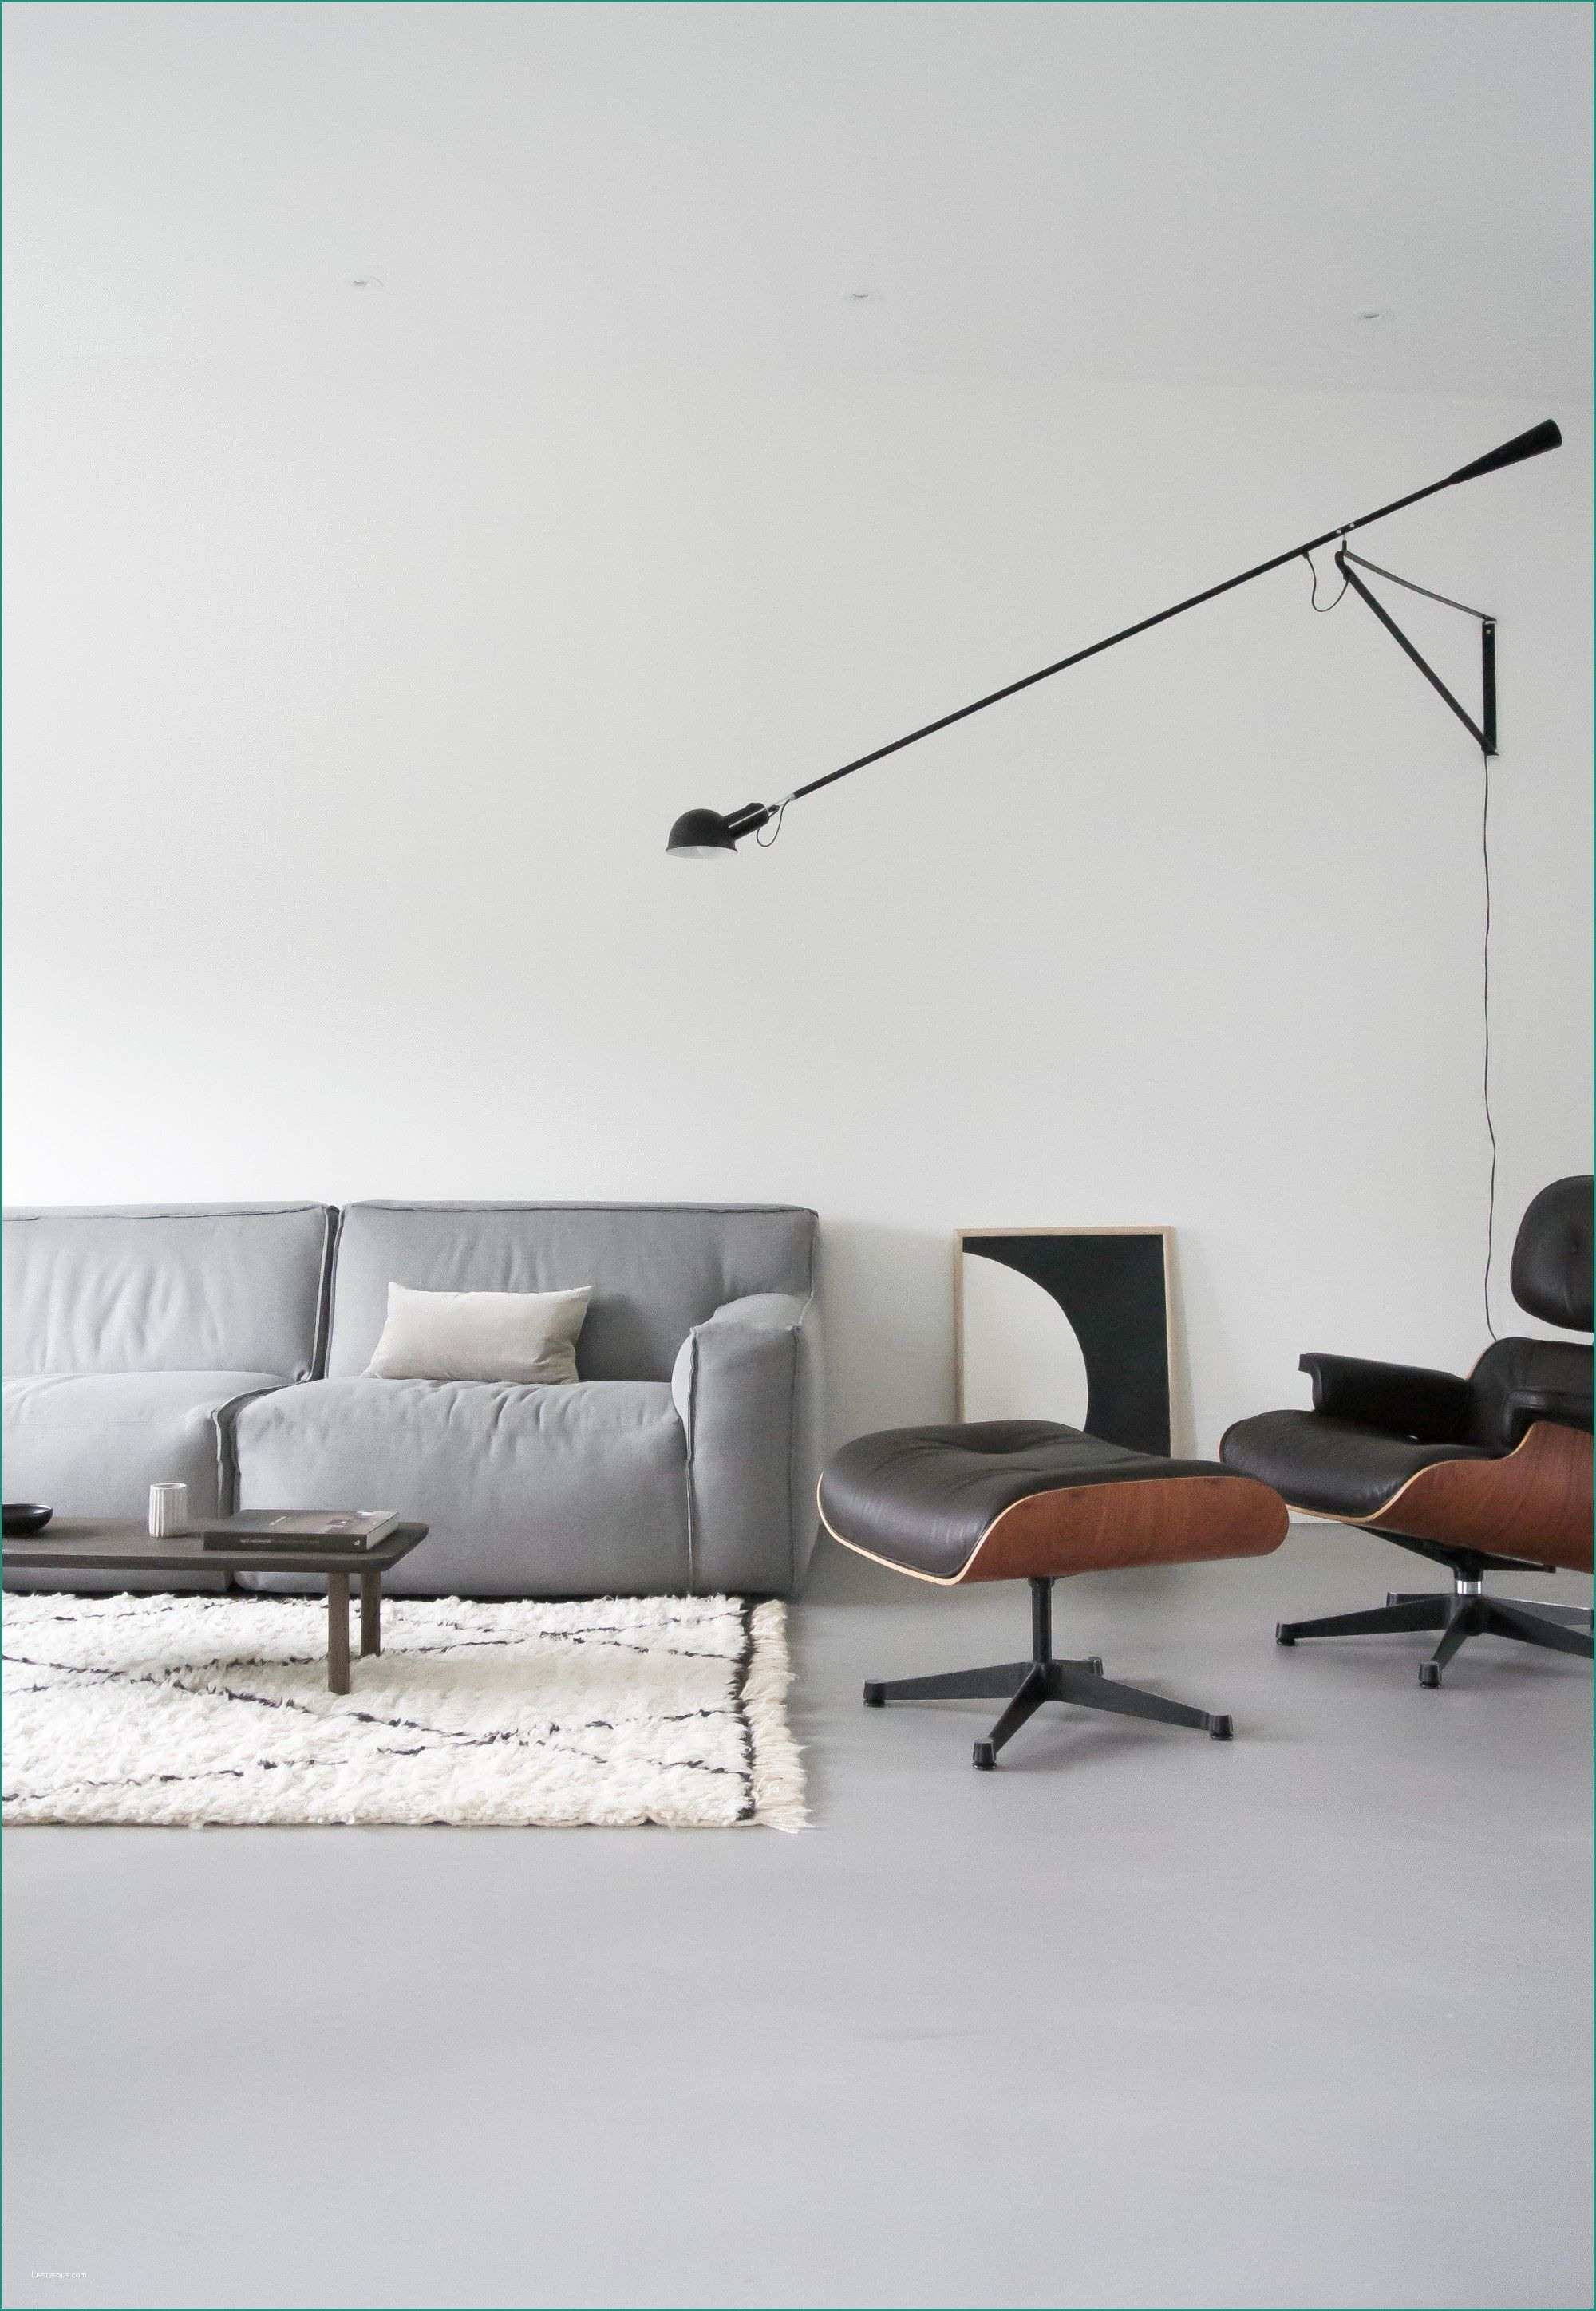 Sedia Dsw Charles Eames E Flos 265 at Home April and May ÐÐ½ÑÐµÑÑÐµÑ Pinterest